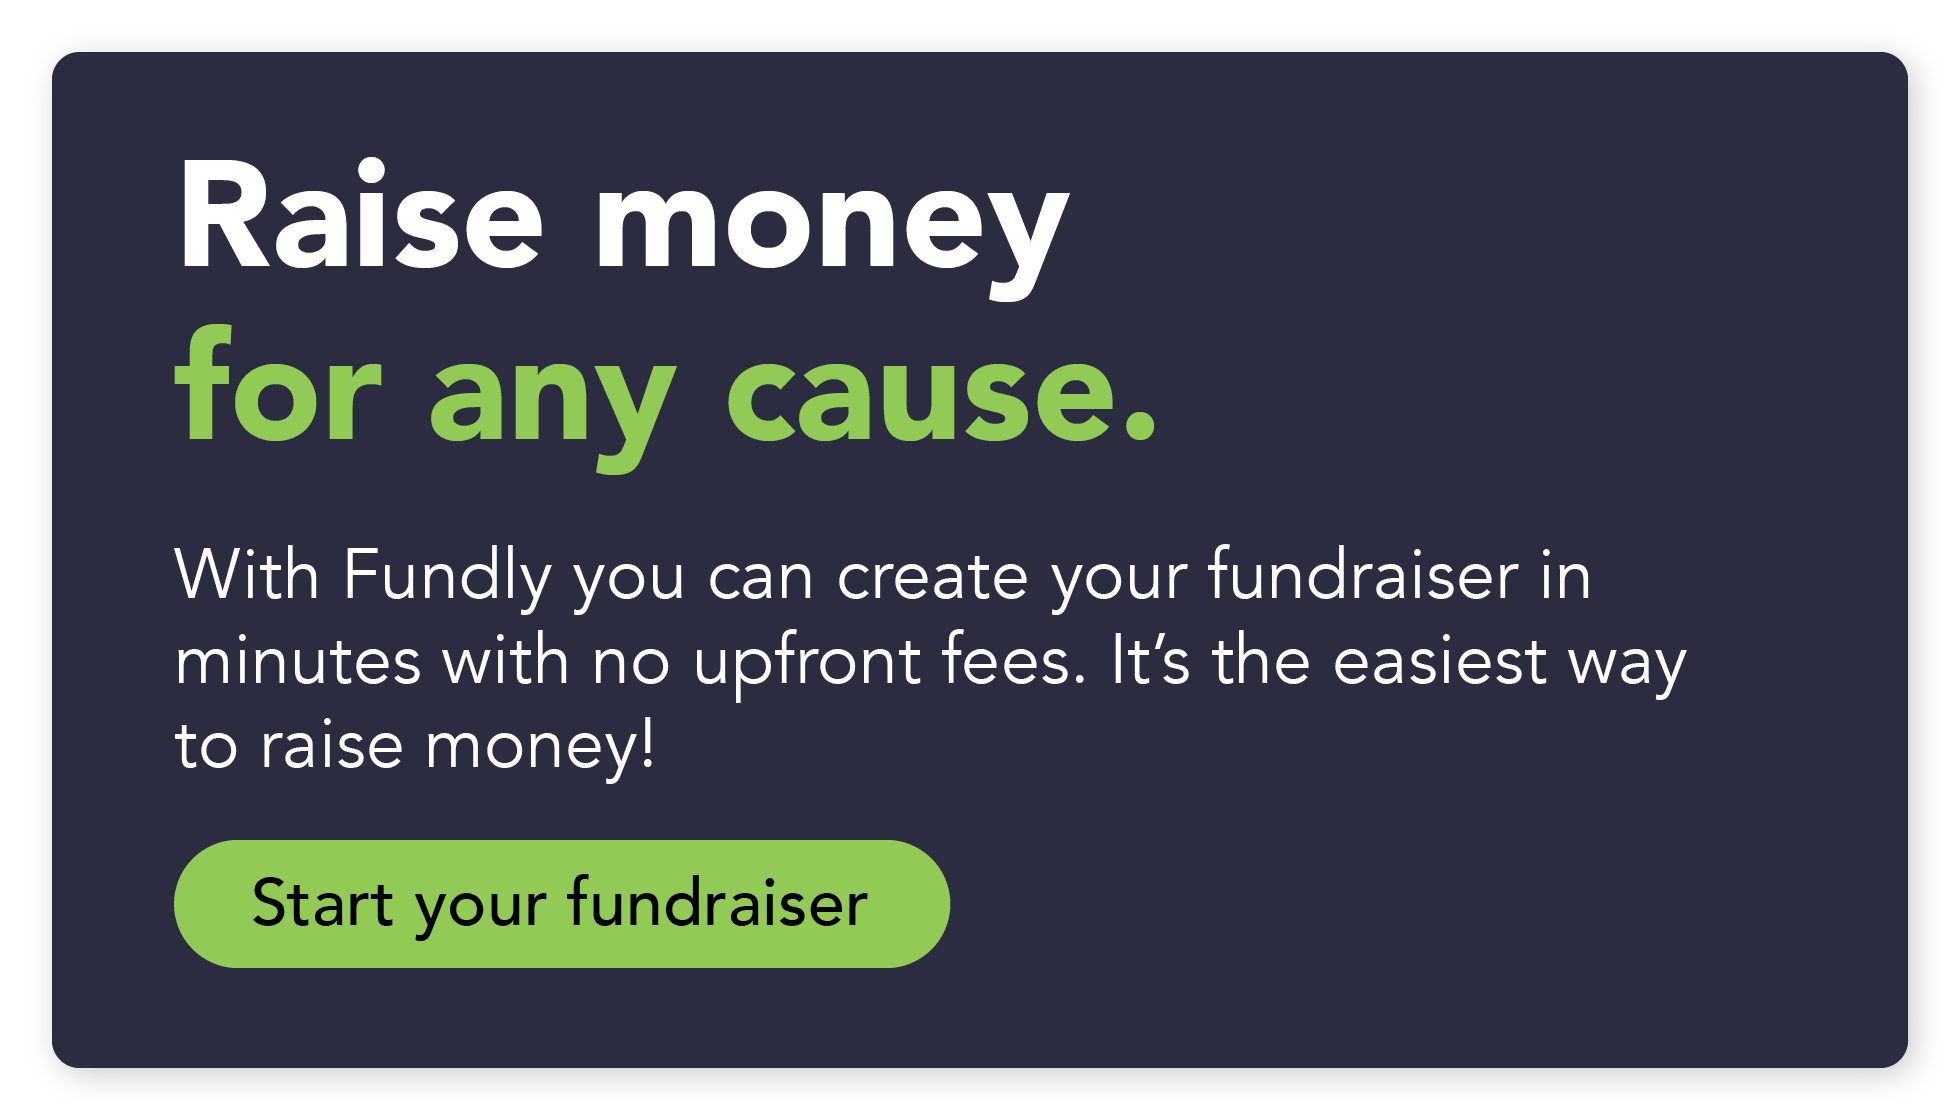 Raise money for any cause. With Fundly, you can create your fundraiser in minutes with no upfront fees. It's the easiest way to raise money! Start your fundraiser. 